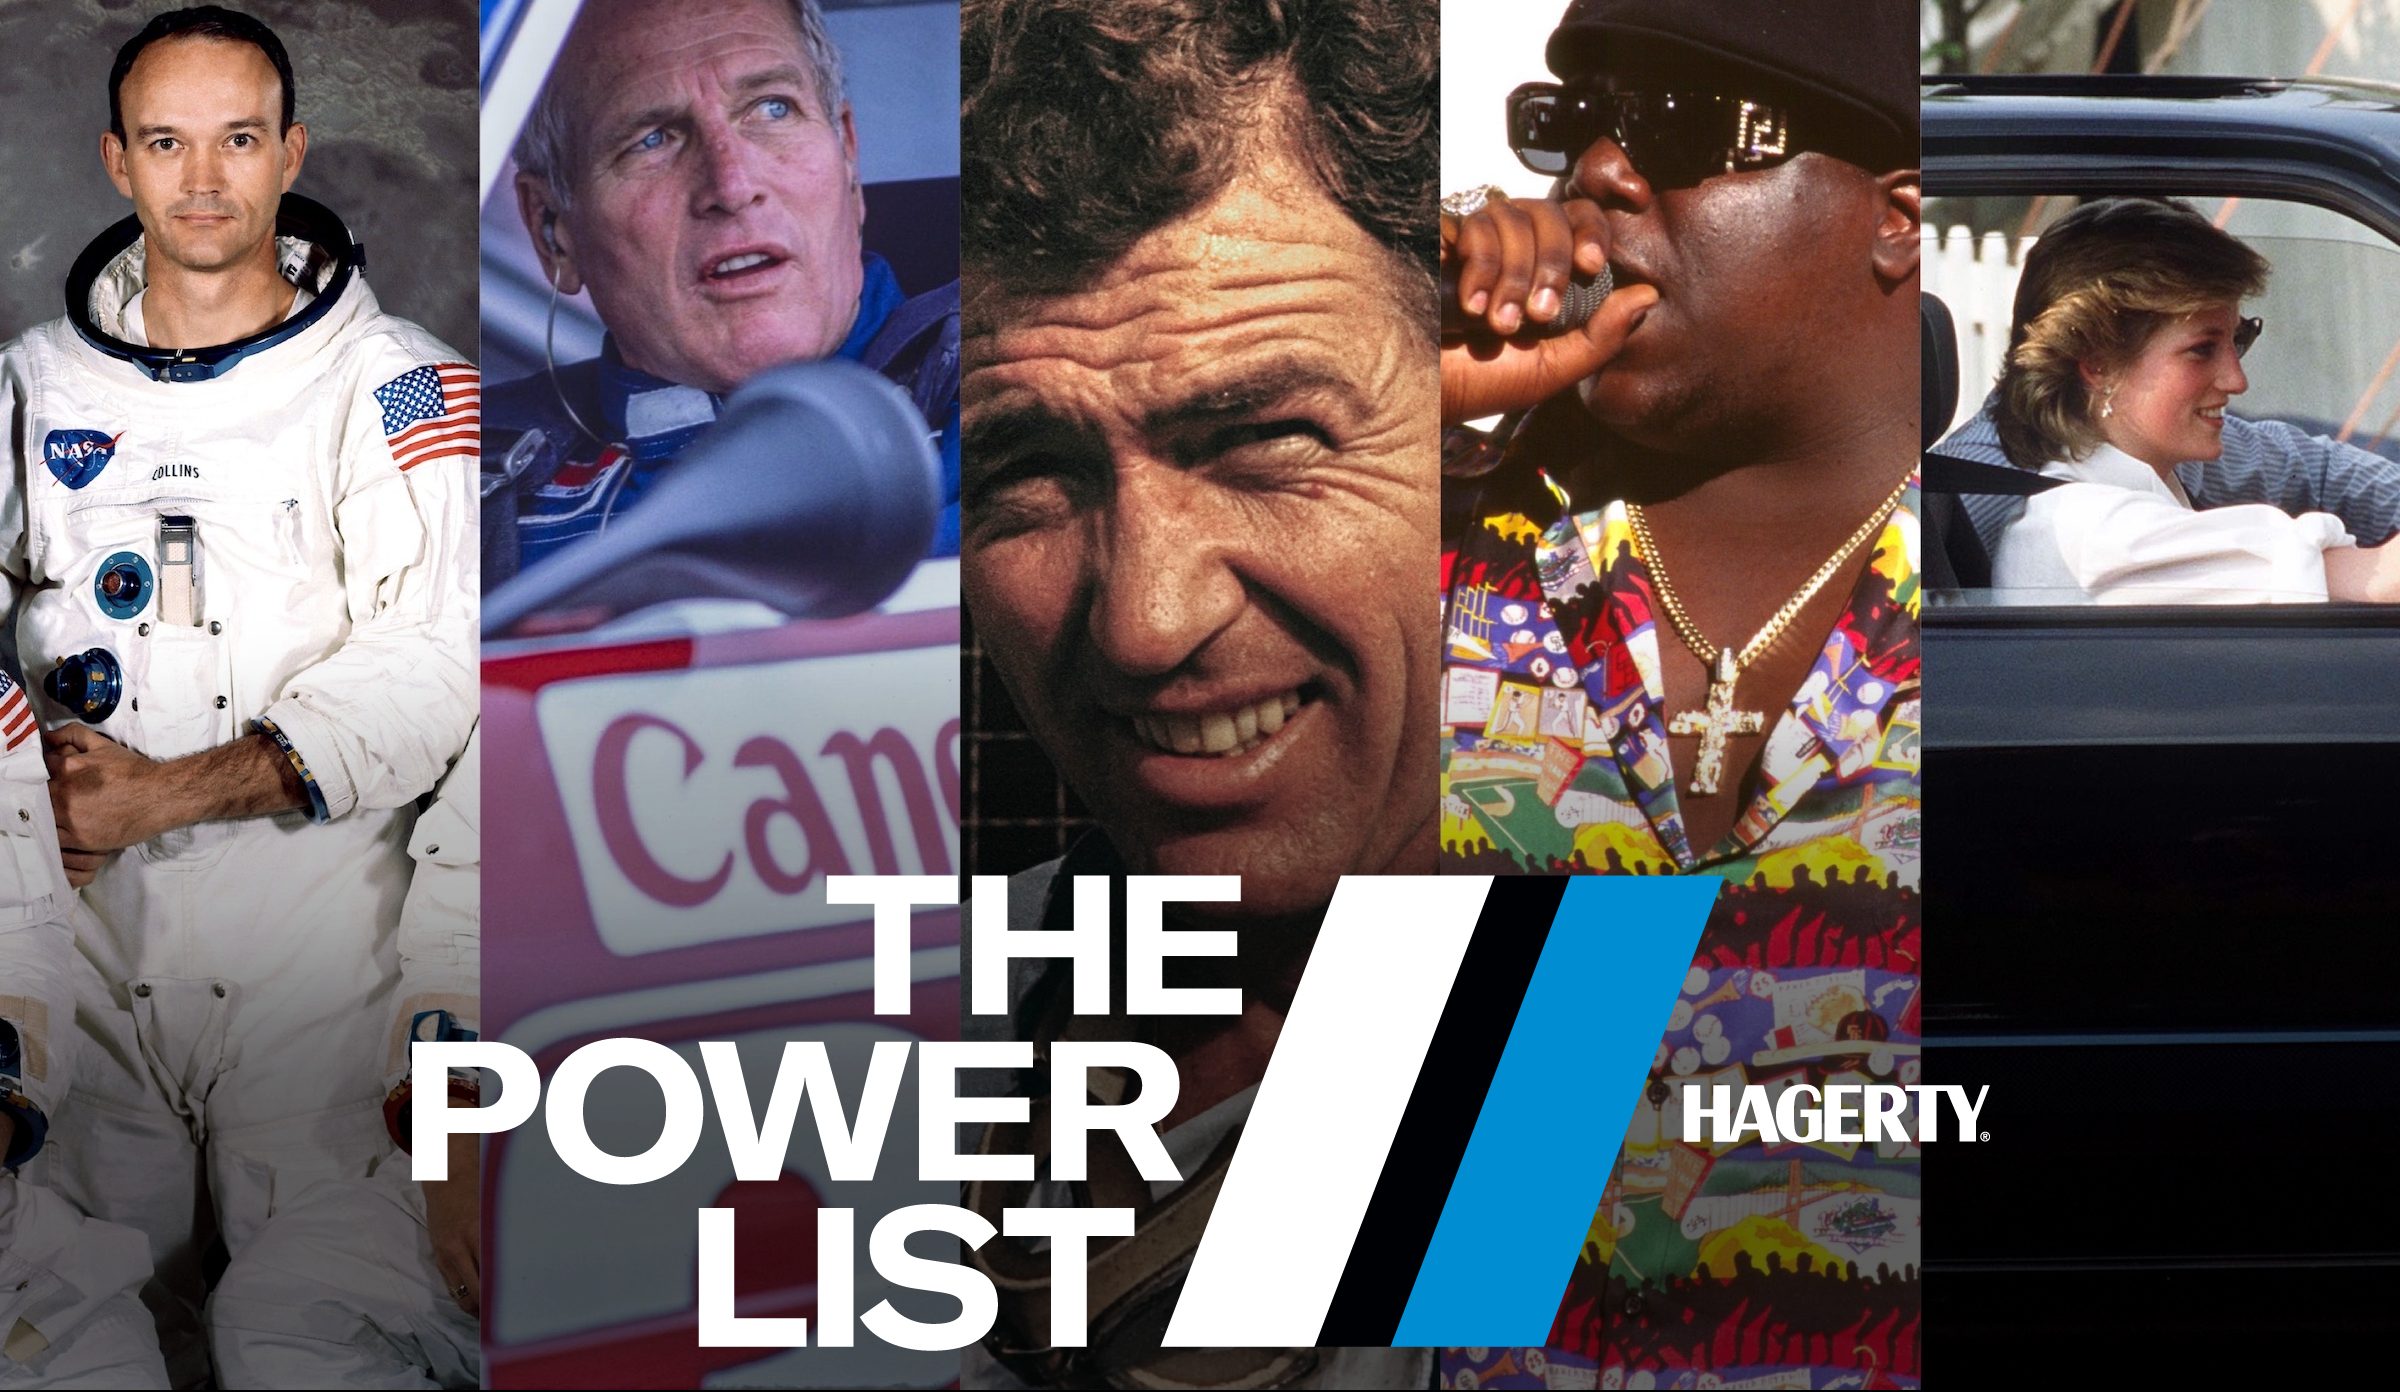 Introducing The Hagerty Power List